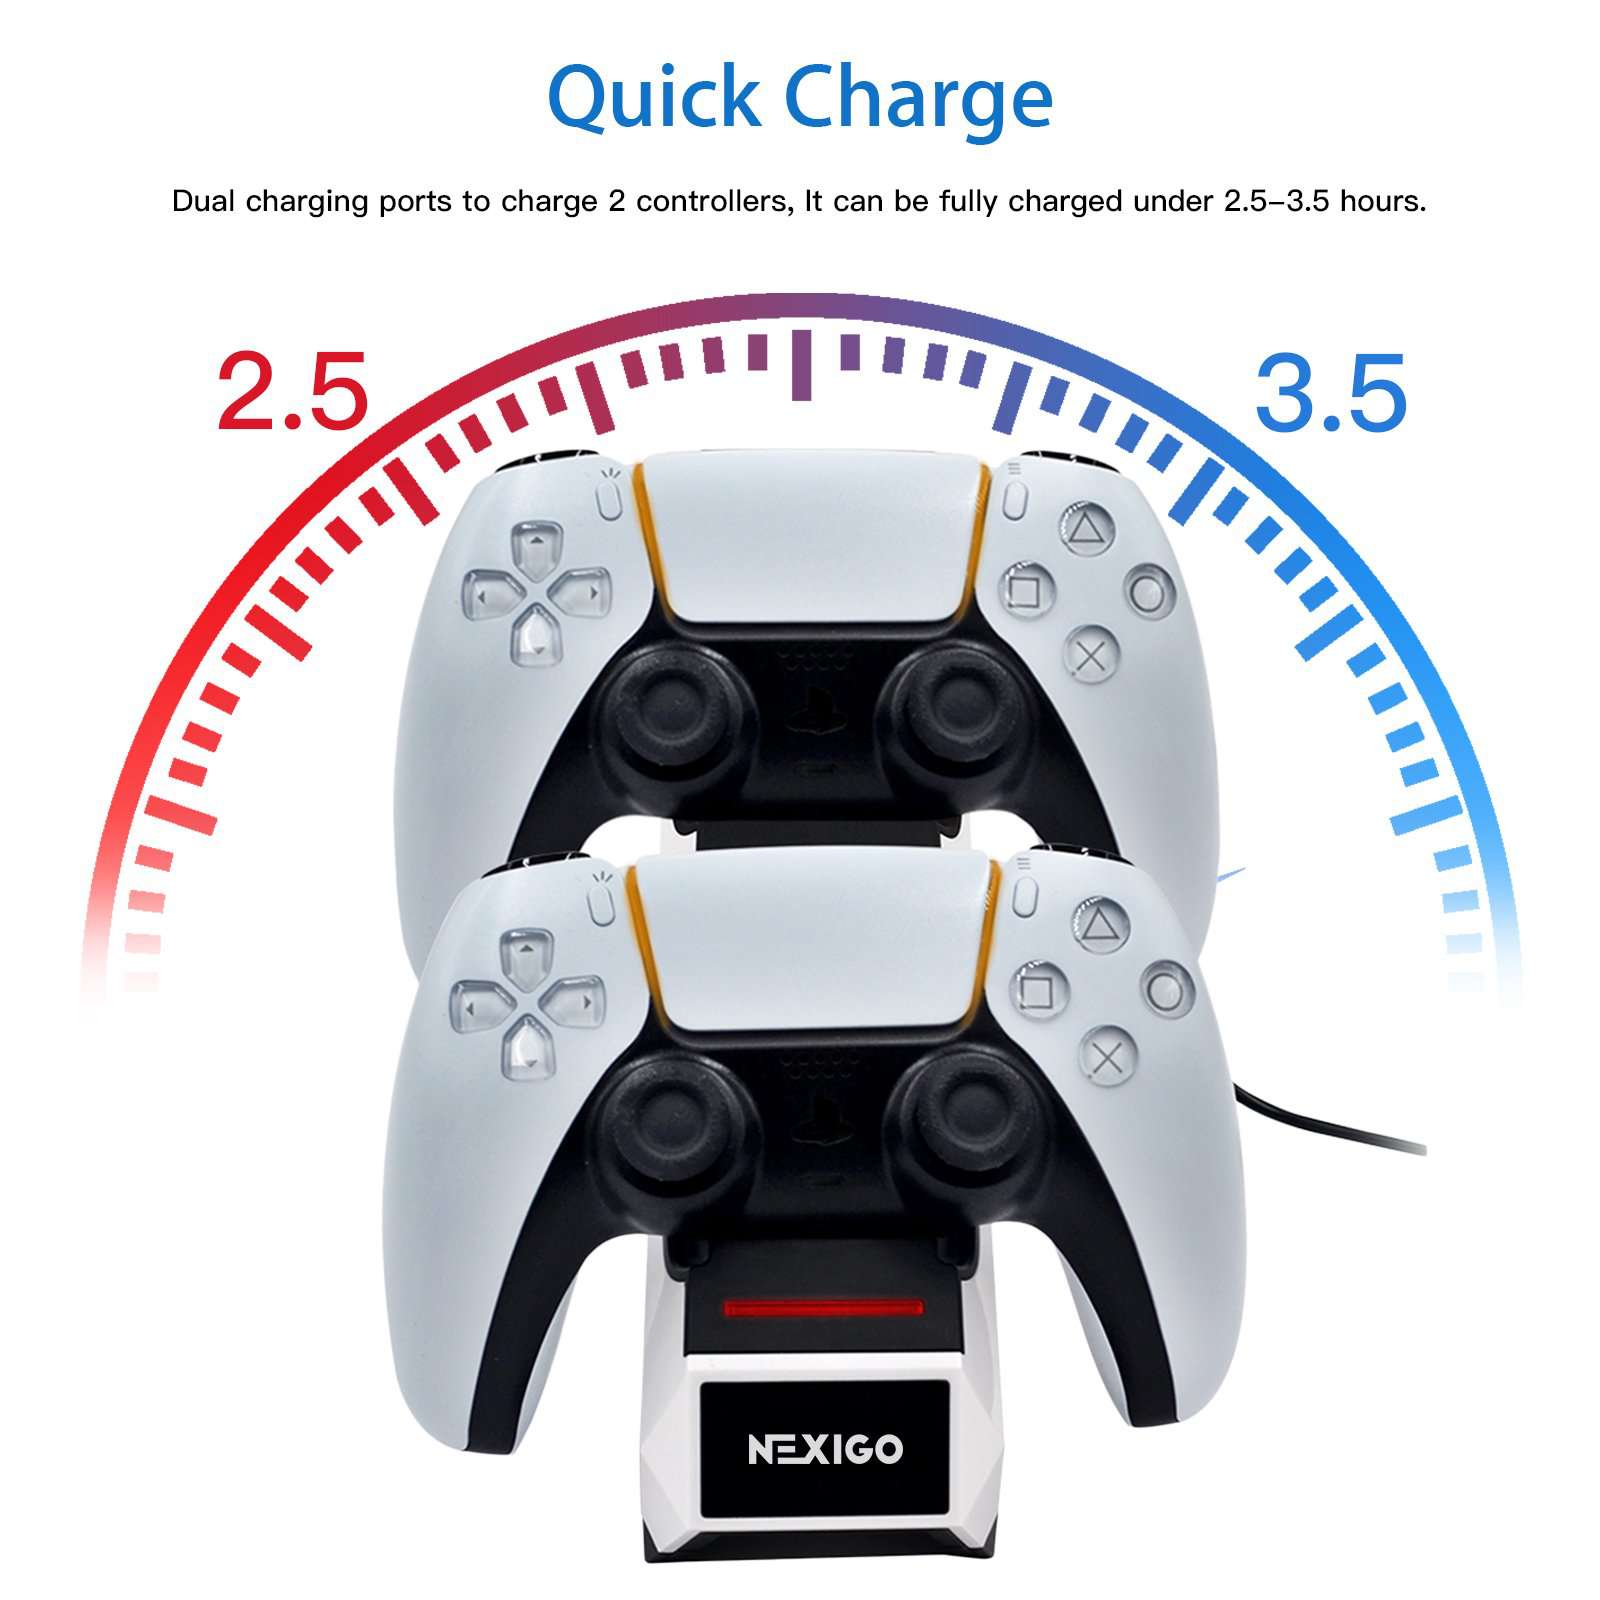 Fully charge your PS5 controller in 2.5-3.5 hours with this charging station